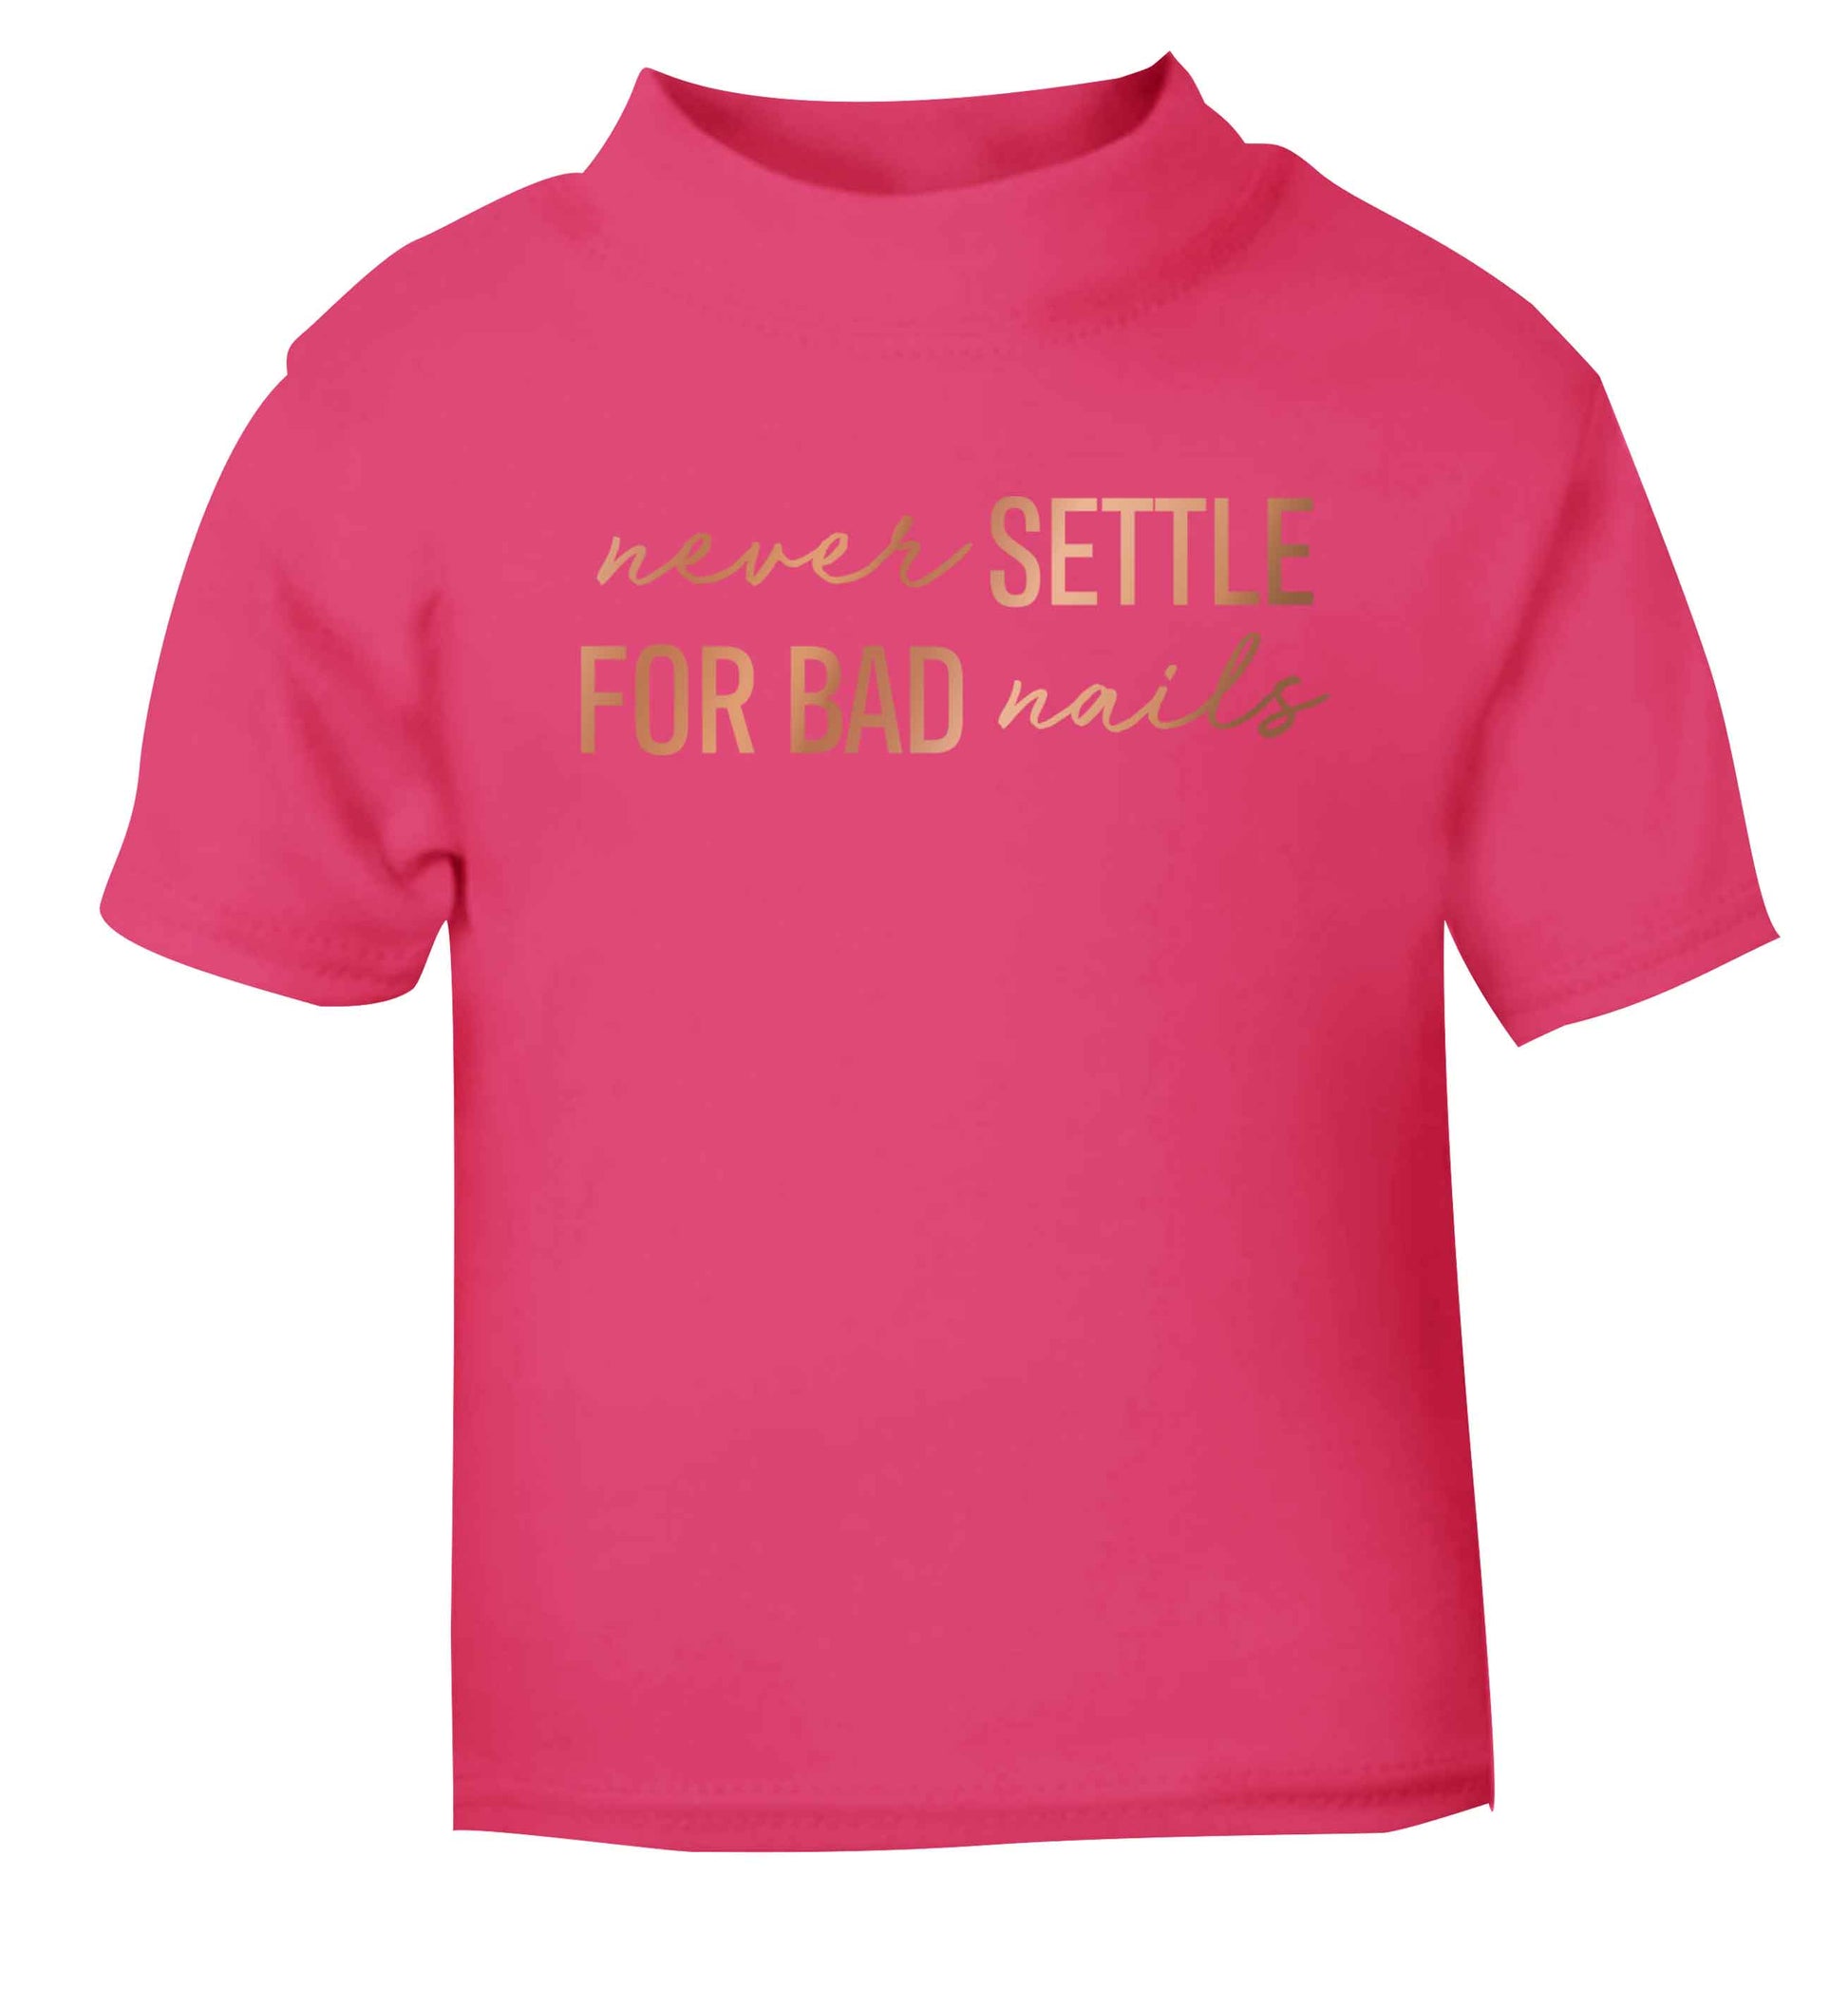 Never settle for bad nails - rose gold pink baby toddler Tshirt 2 Years